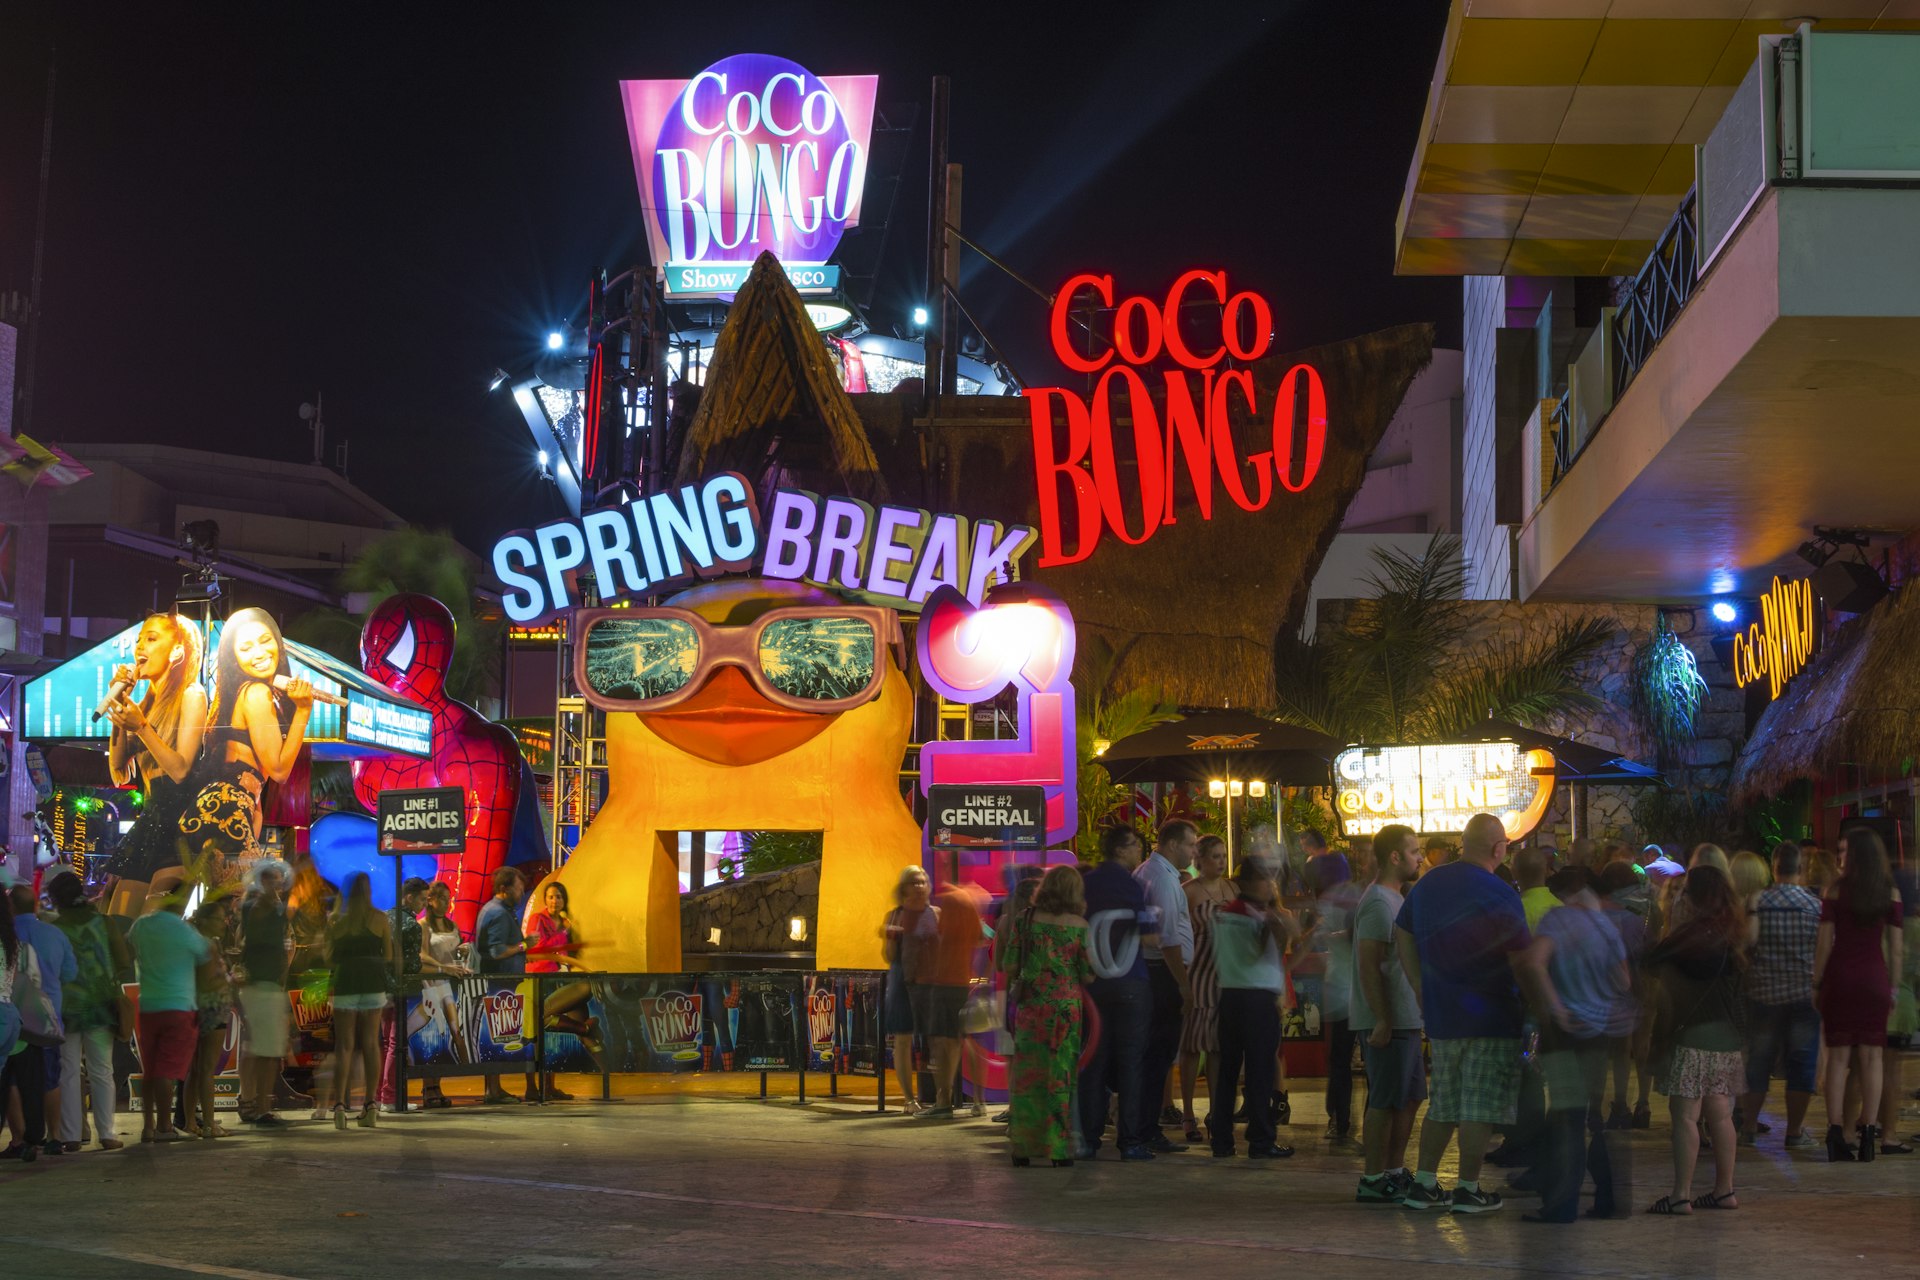 tourists stand in long lines to enter the popular Coco Bongo nightclub in Cancun at the start of Spring Break